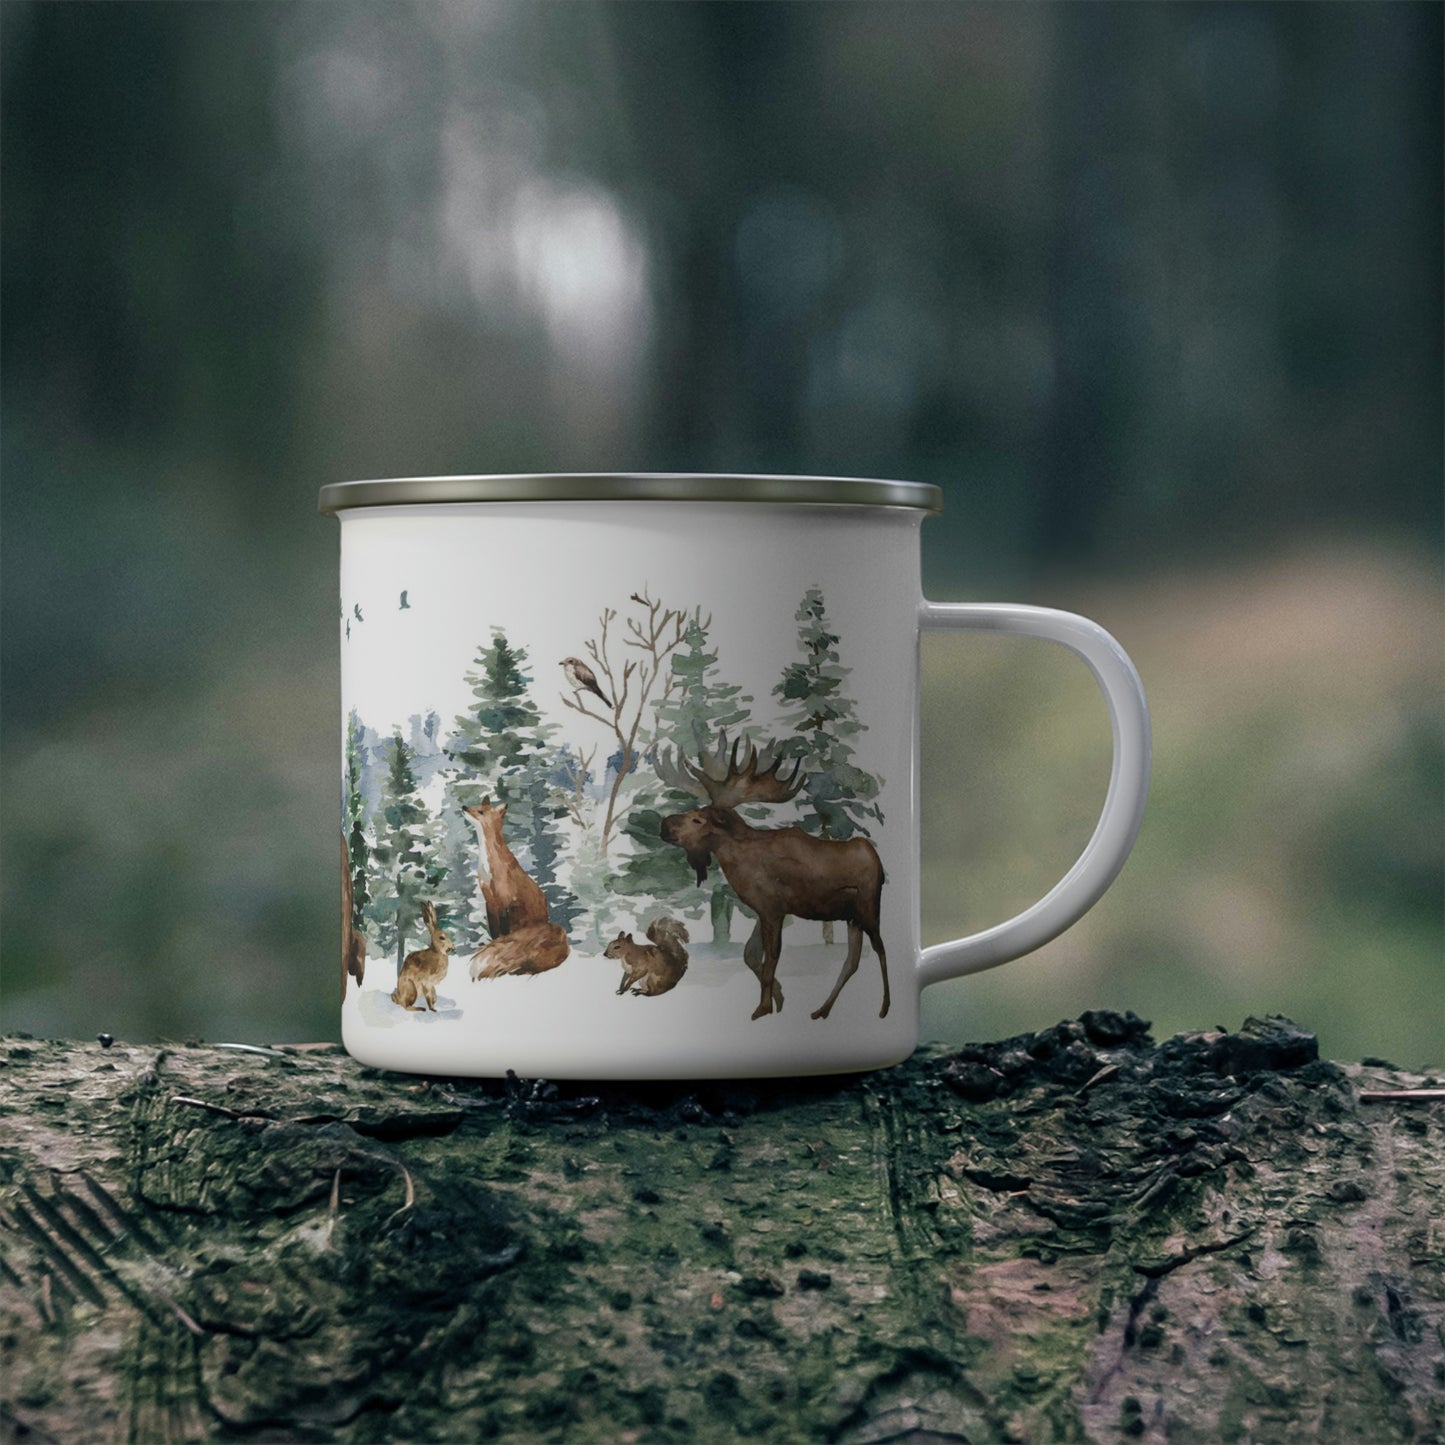 Woodland Enamel Camping Mug, Forest animals coffee cup - Enchanted Forest